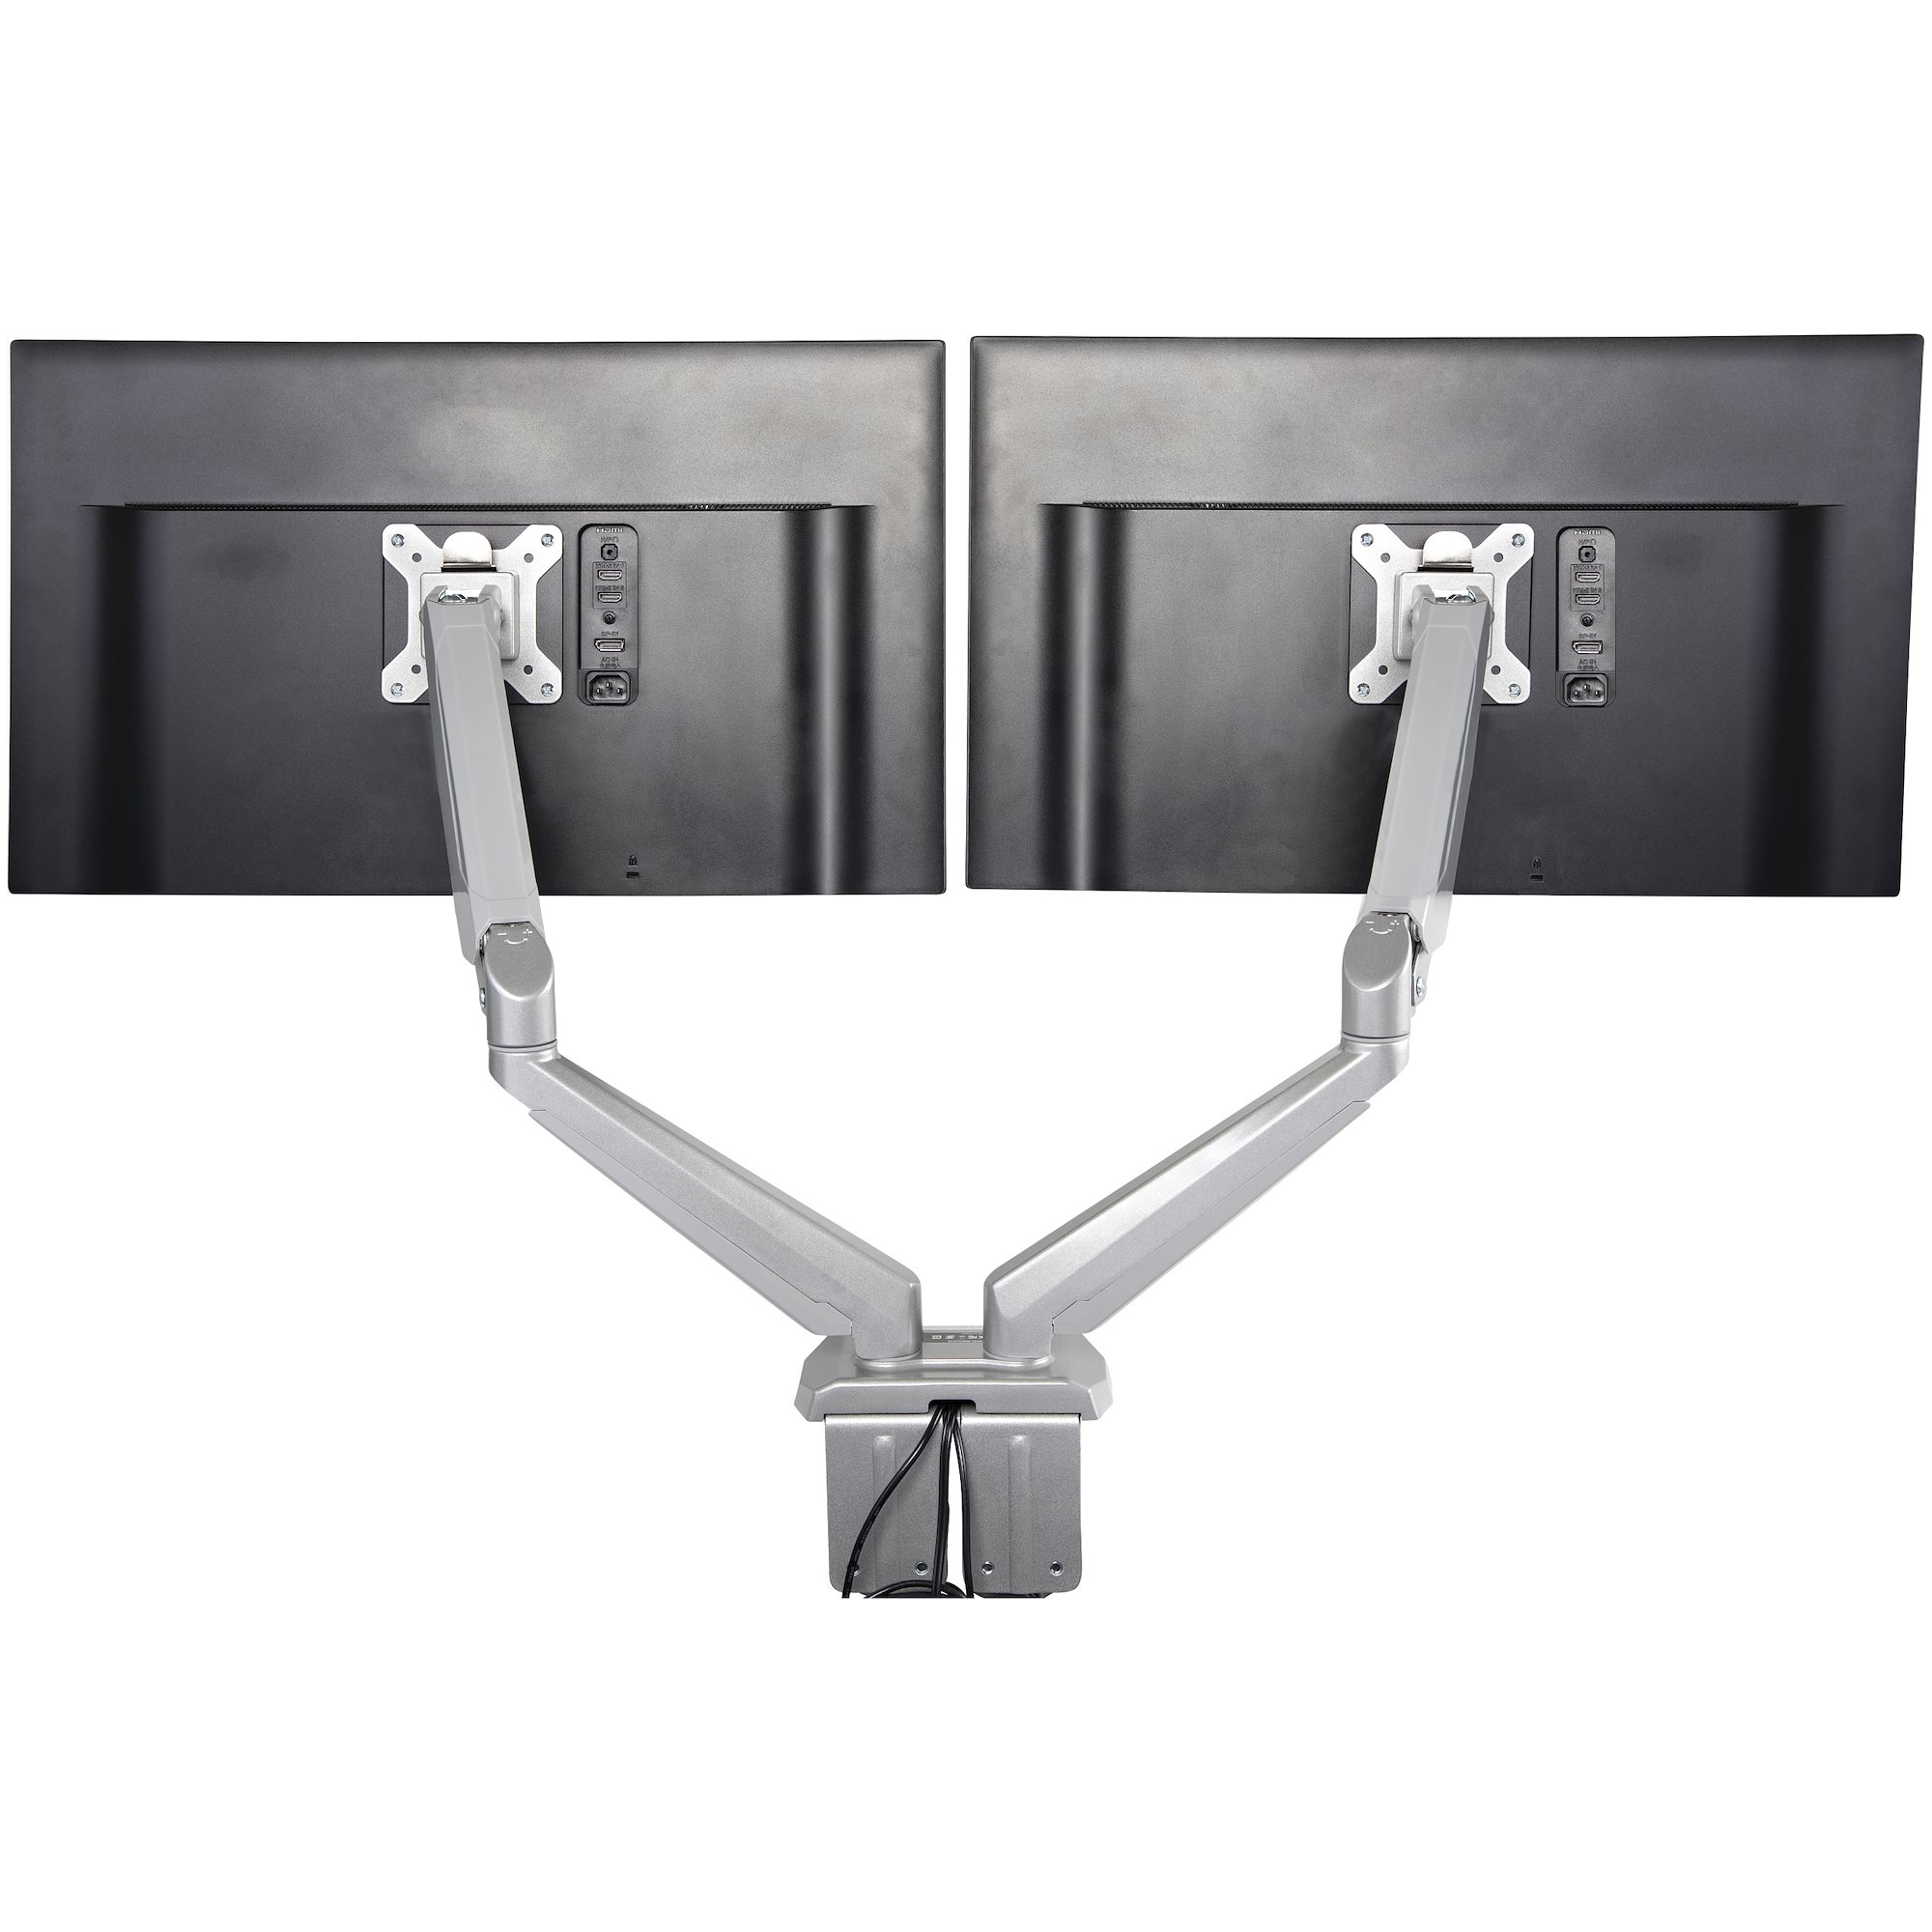 StarTech.com Desk Mount Dual Monitor Arm with USB & Audio - Desk Clamp VESA Mount for up to 30 inch Displays - 2x USB, 2x 3.5mm audio - Ergonomic Full Motion Dual Monitor Arm - Silver